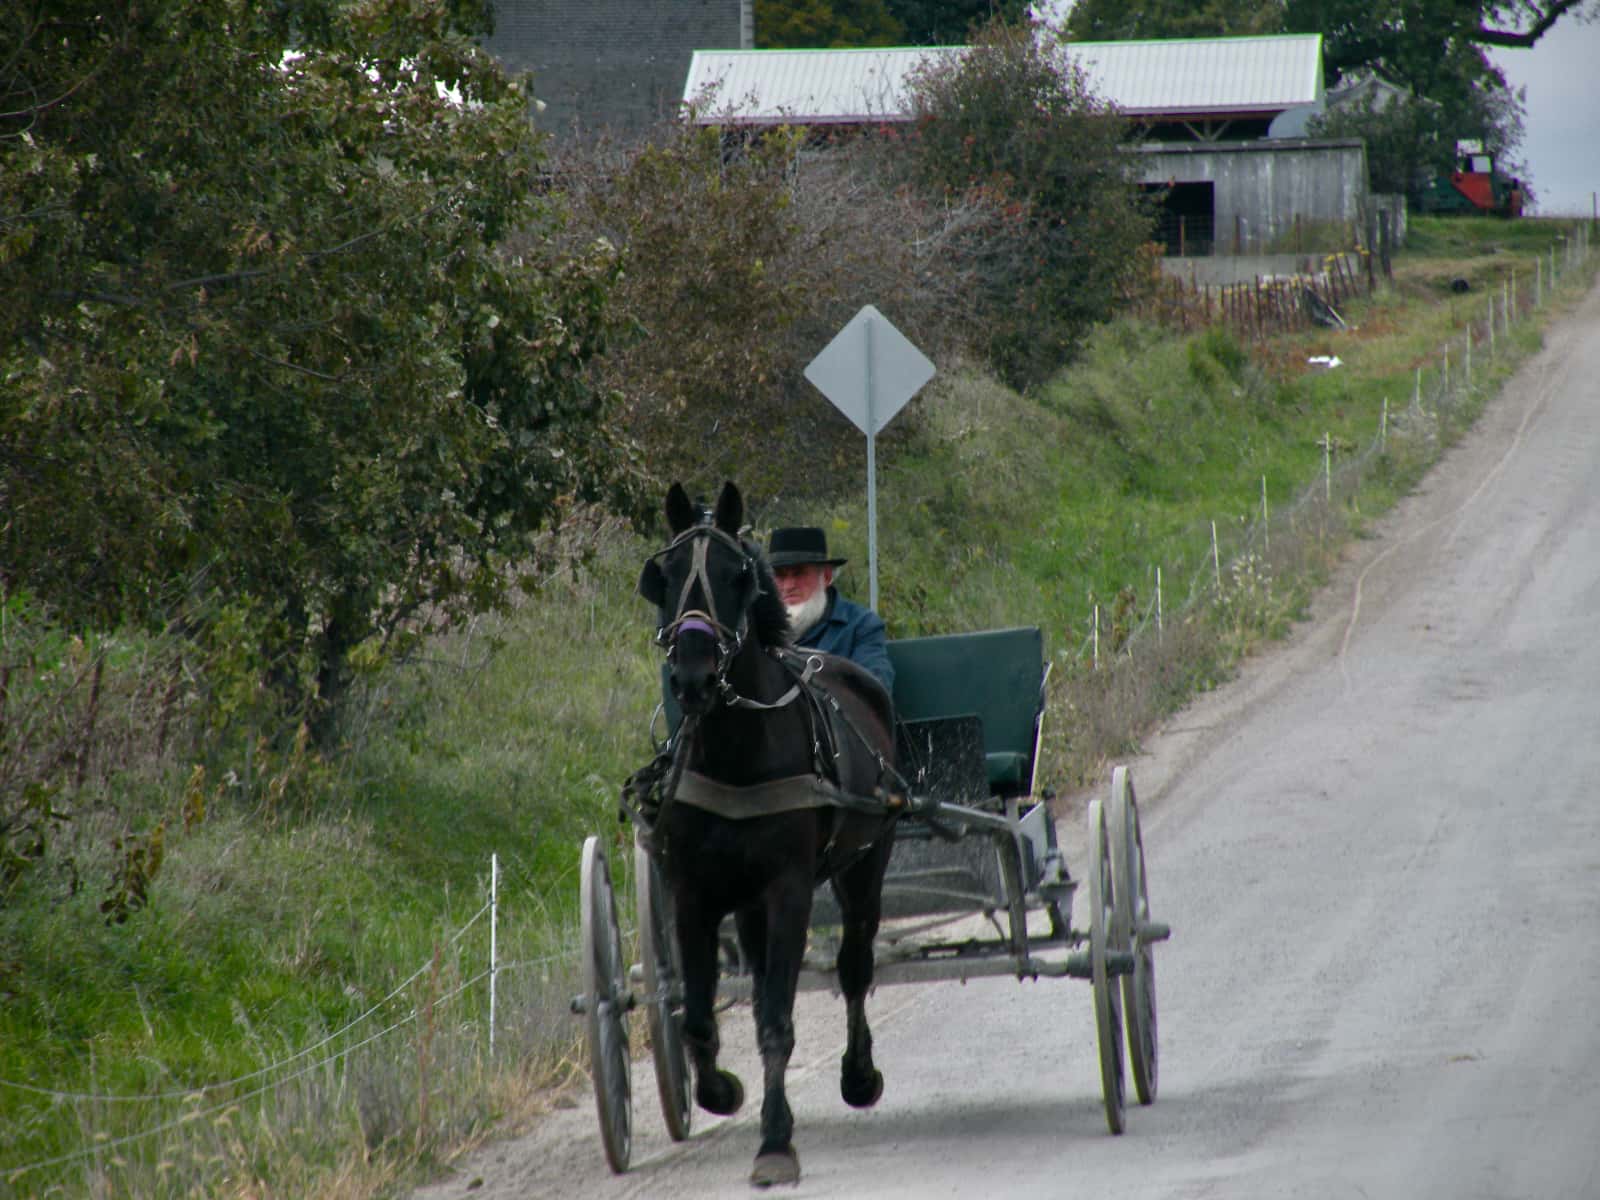 Man with white beard in horse drawn carriage